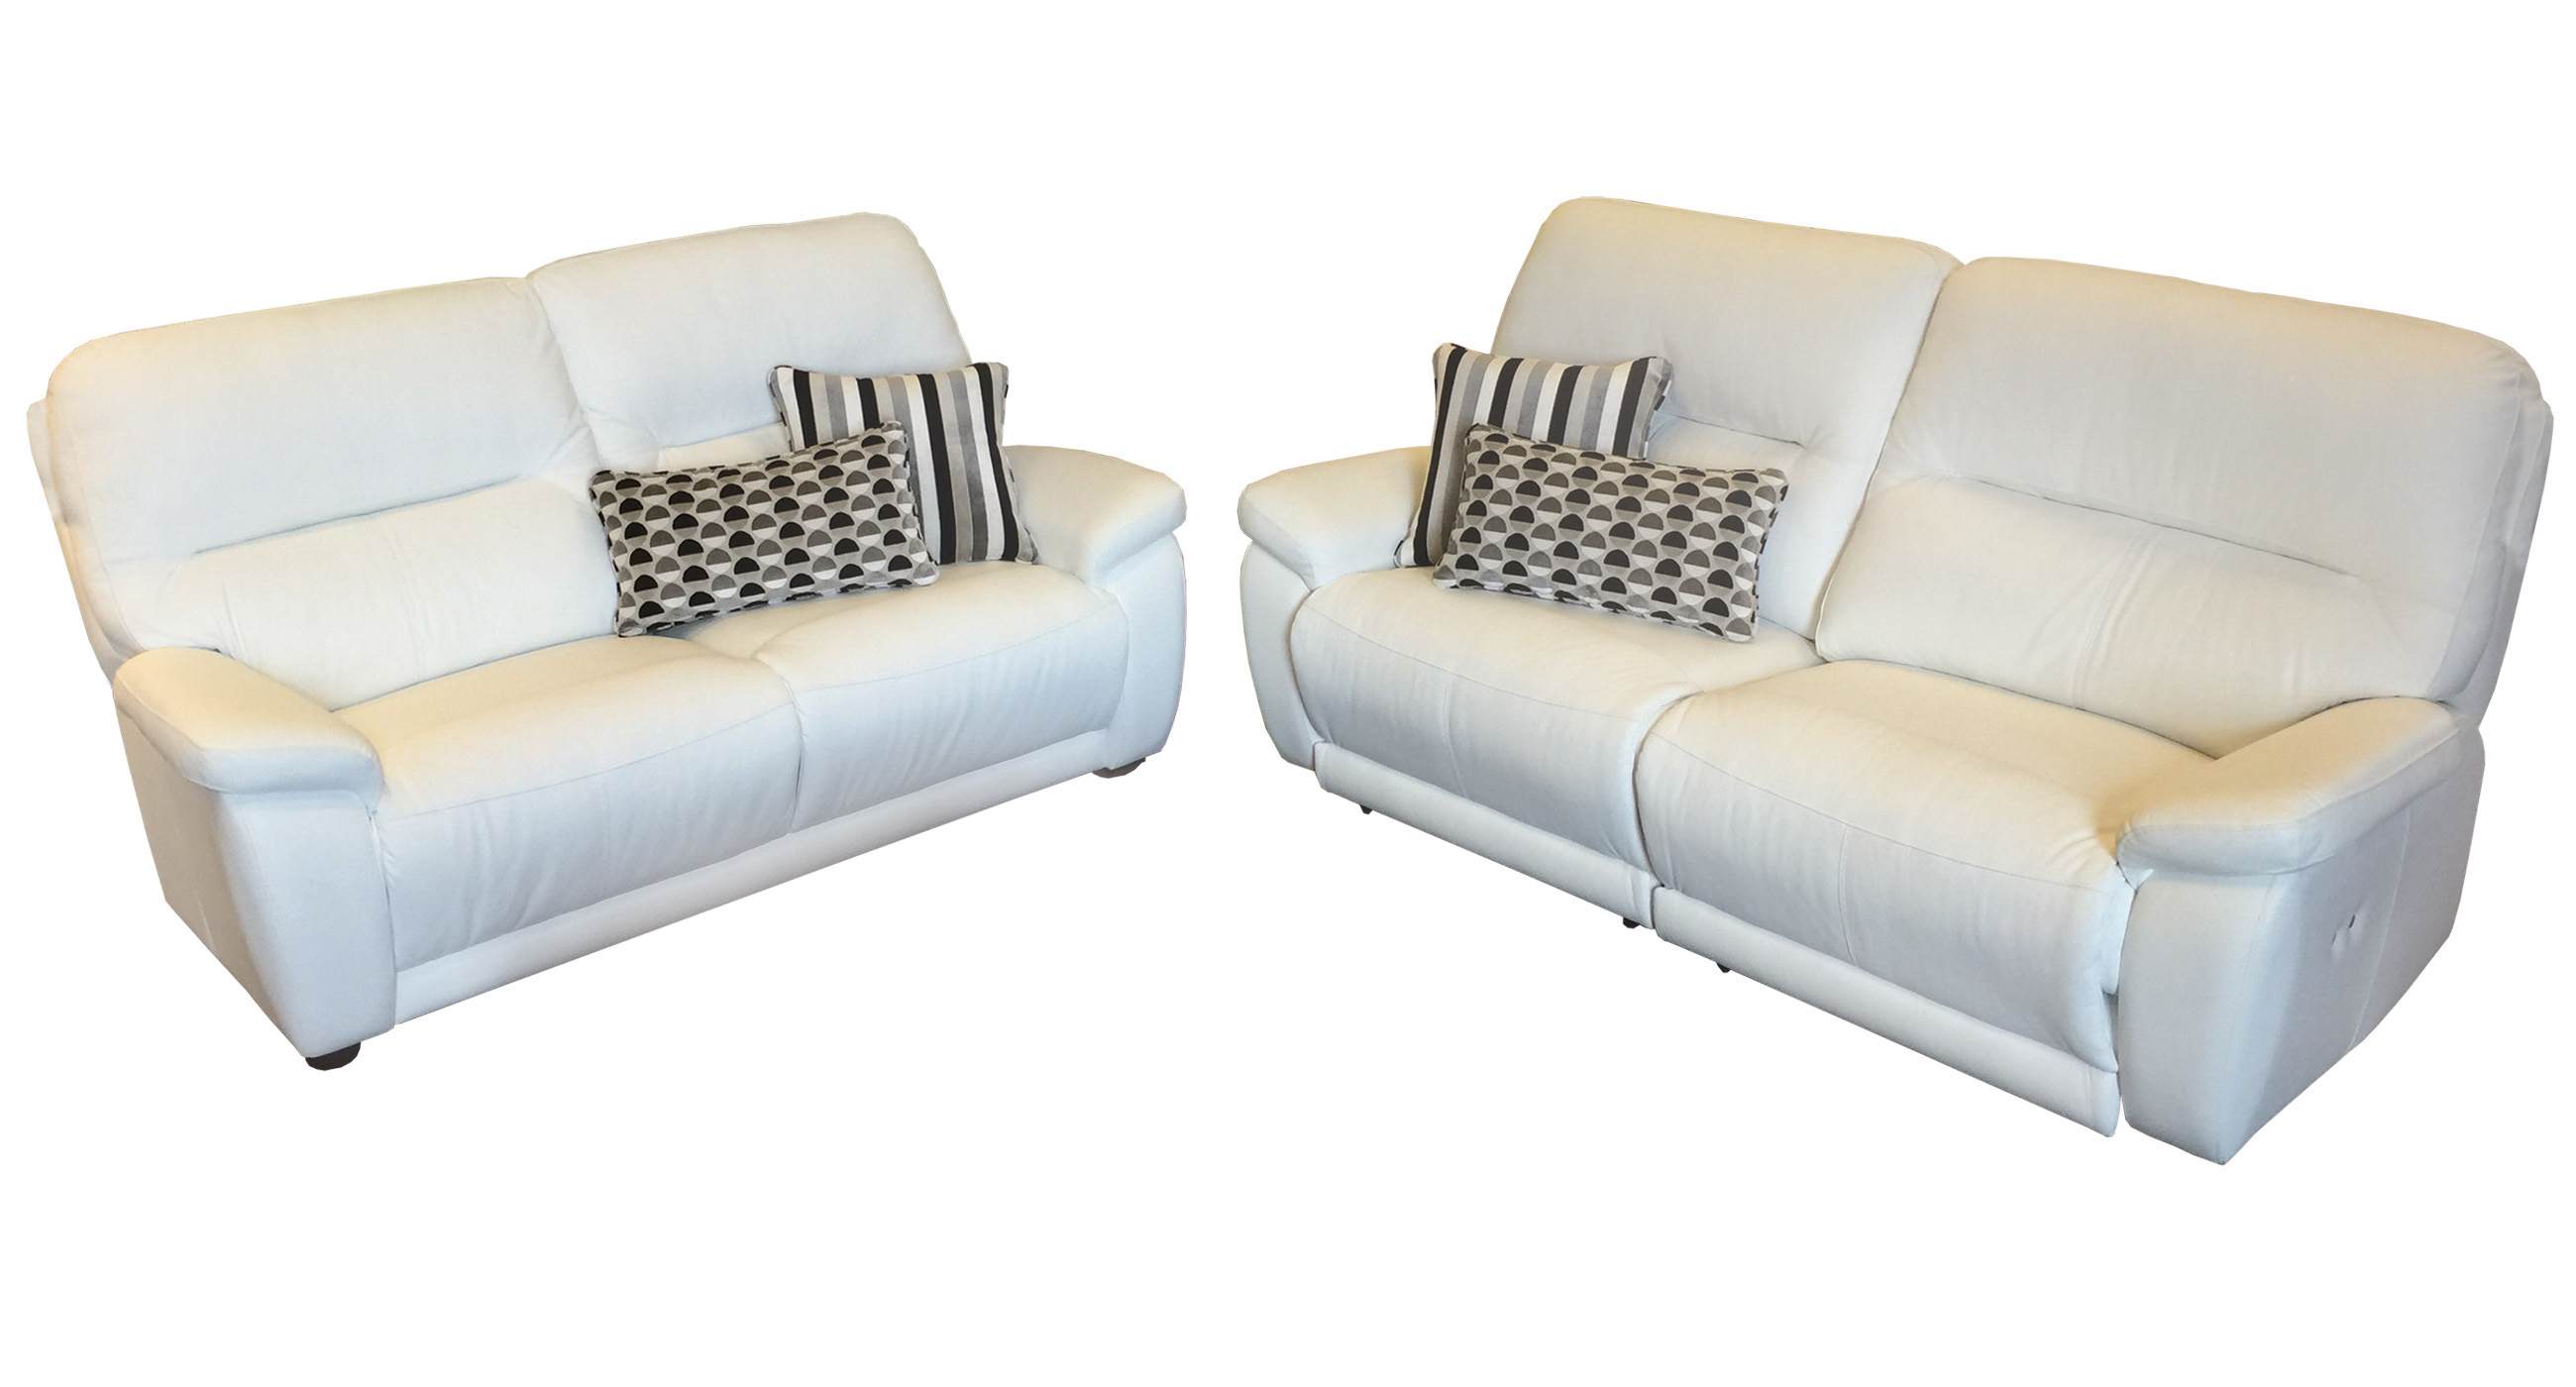 Hudson Reclining Sofa and Chairs